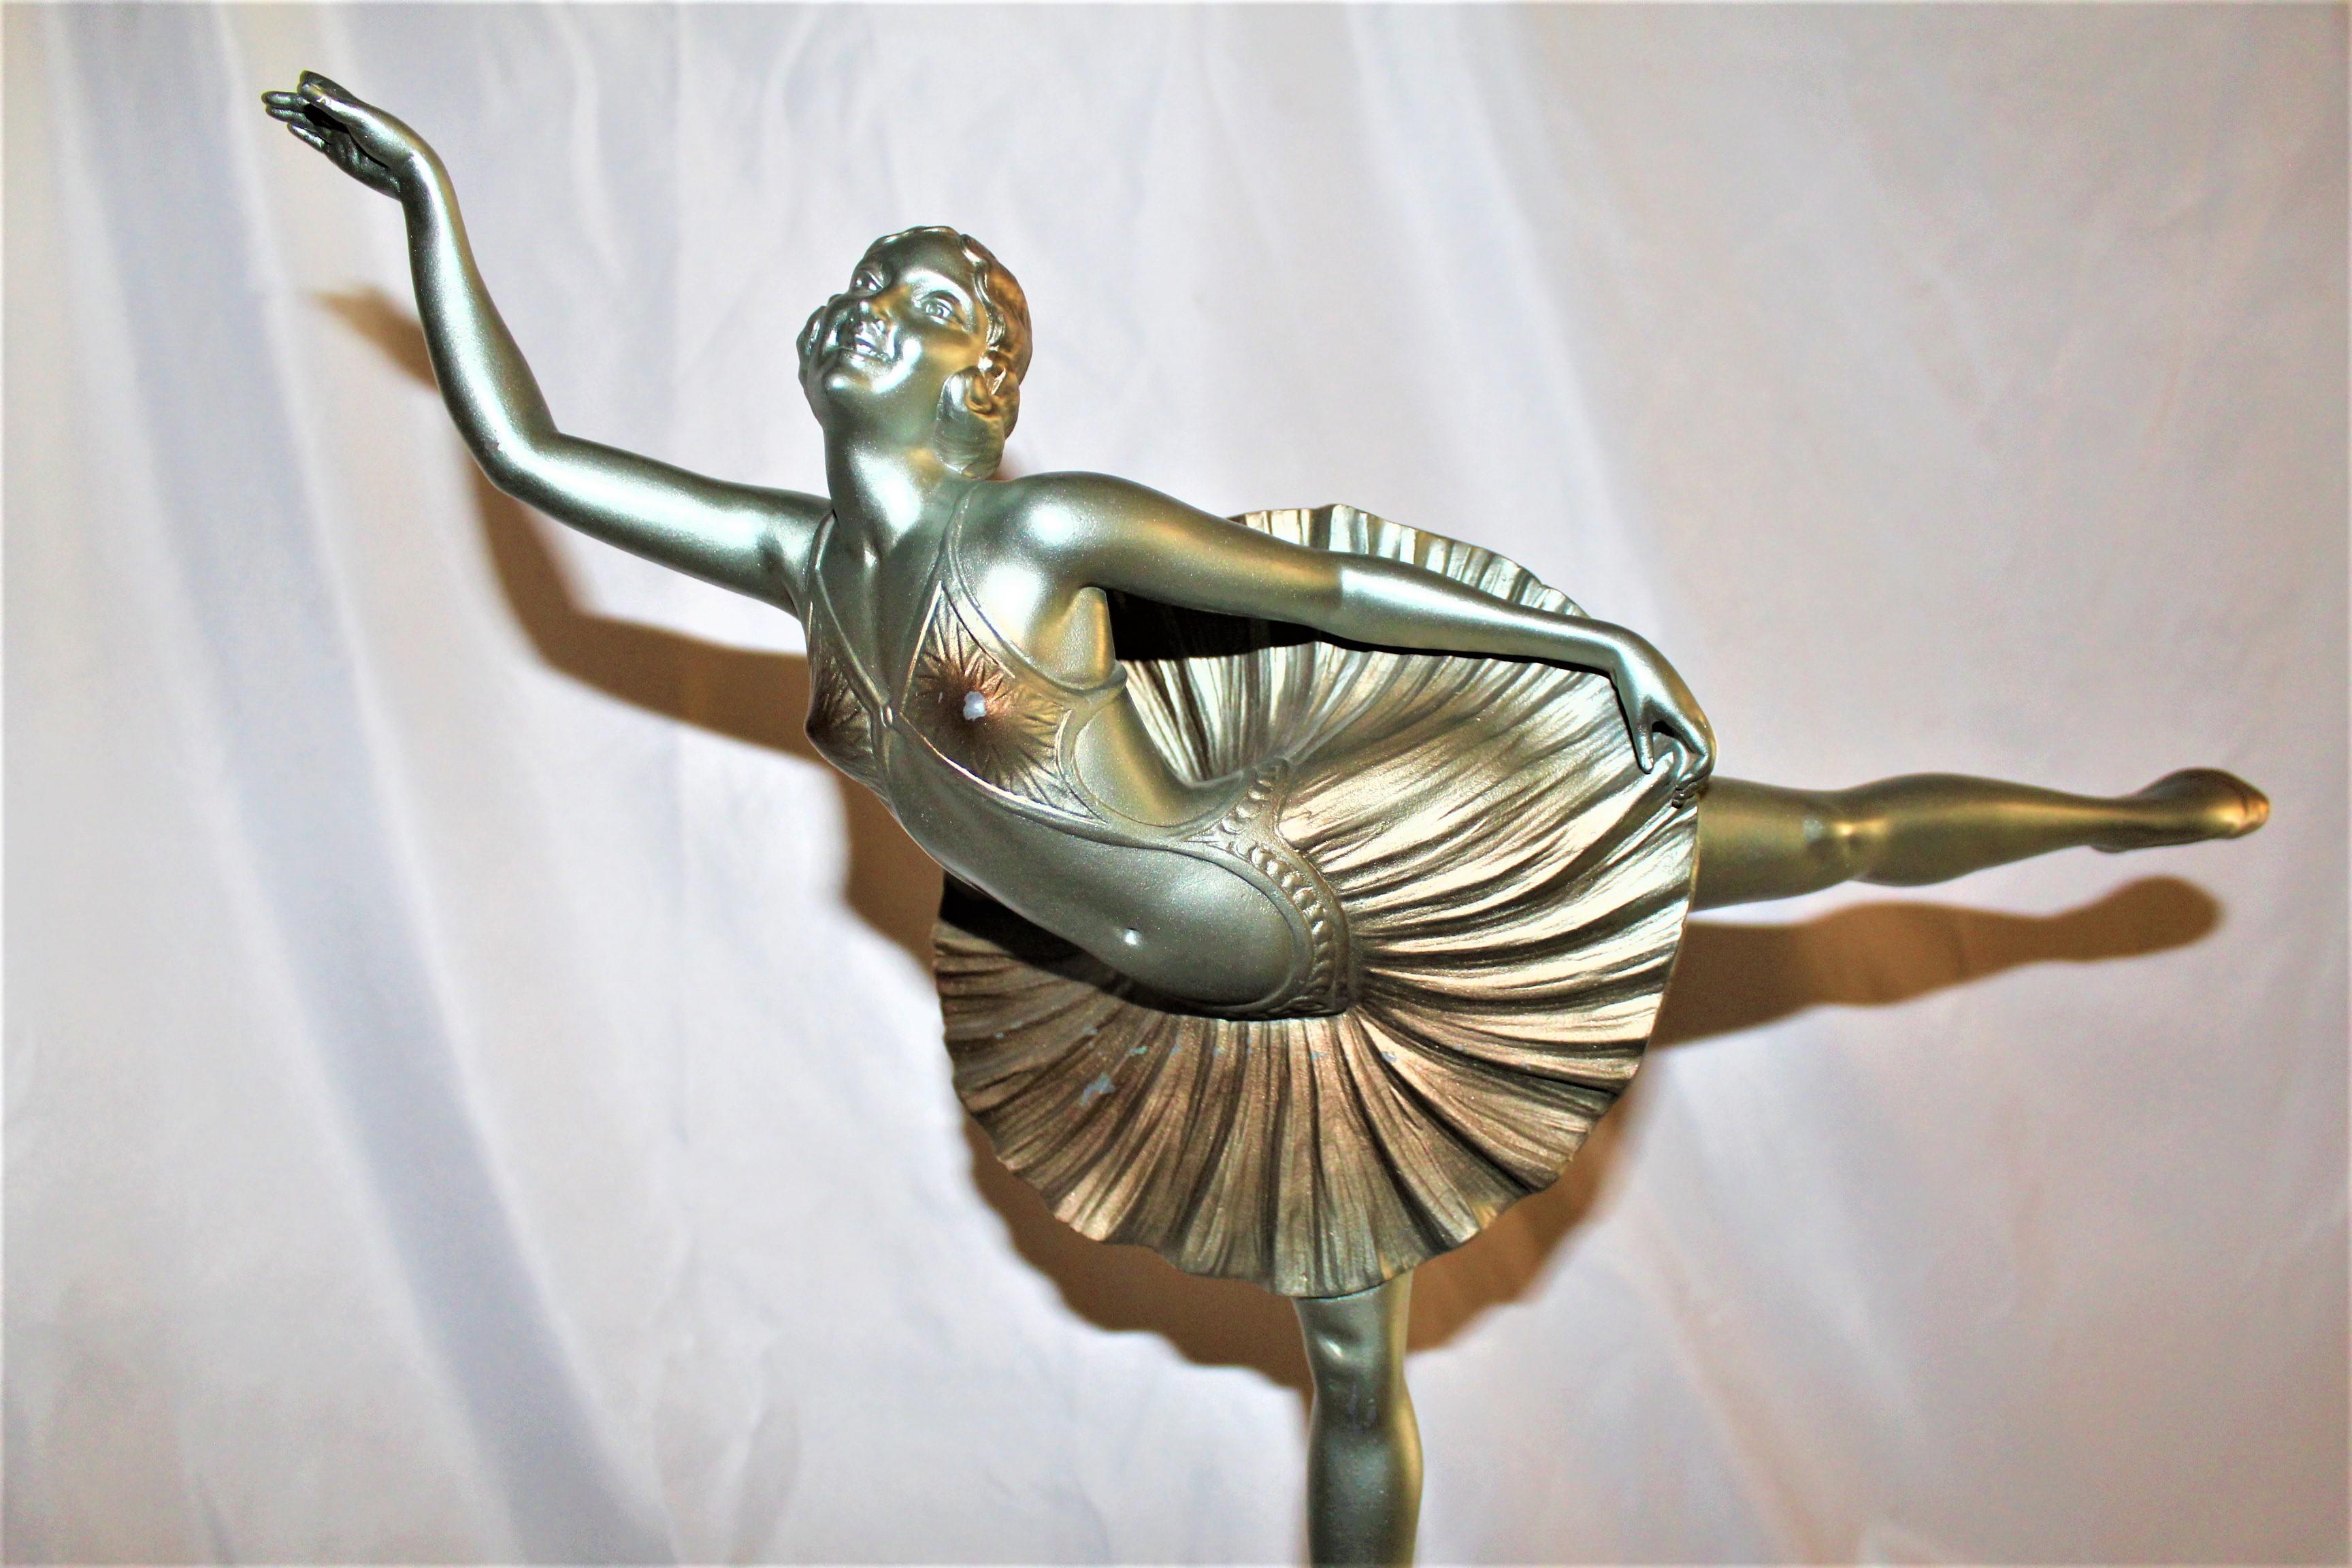 A good size deco figurine of a ballerina standing on one foot. Has part of one finger missing. Measures: Height at 20 3/4